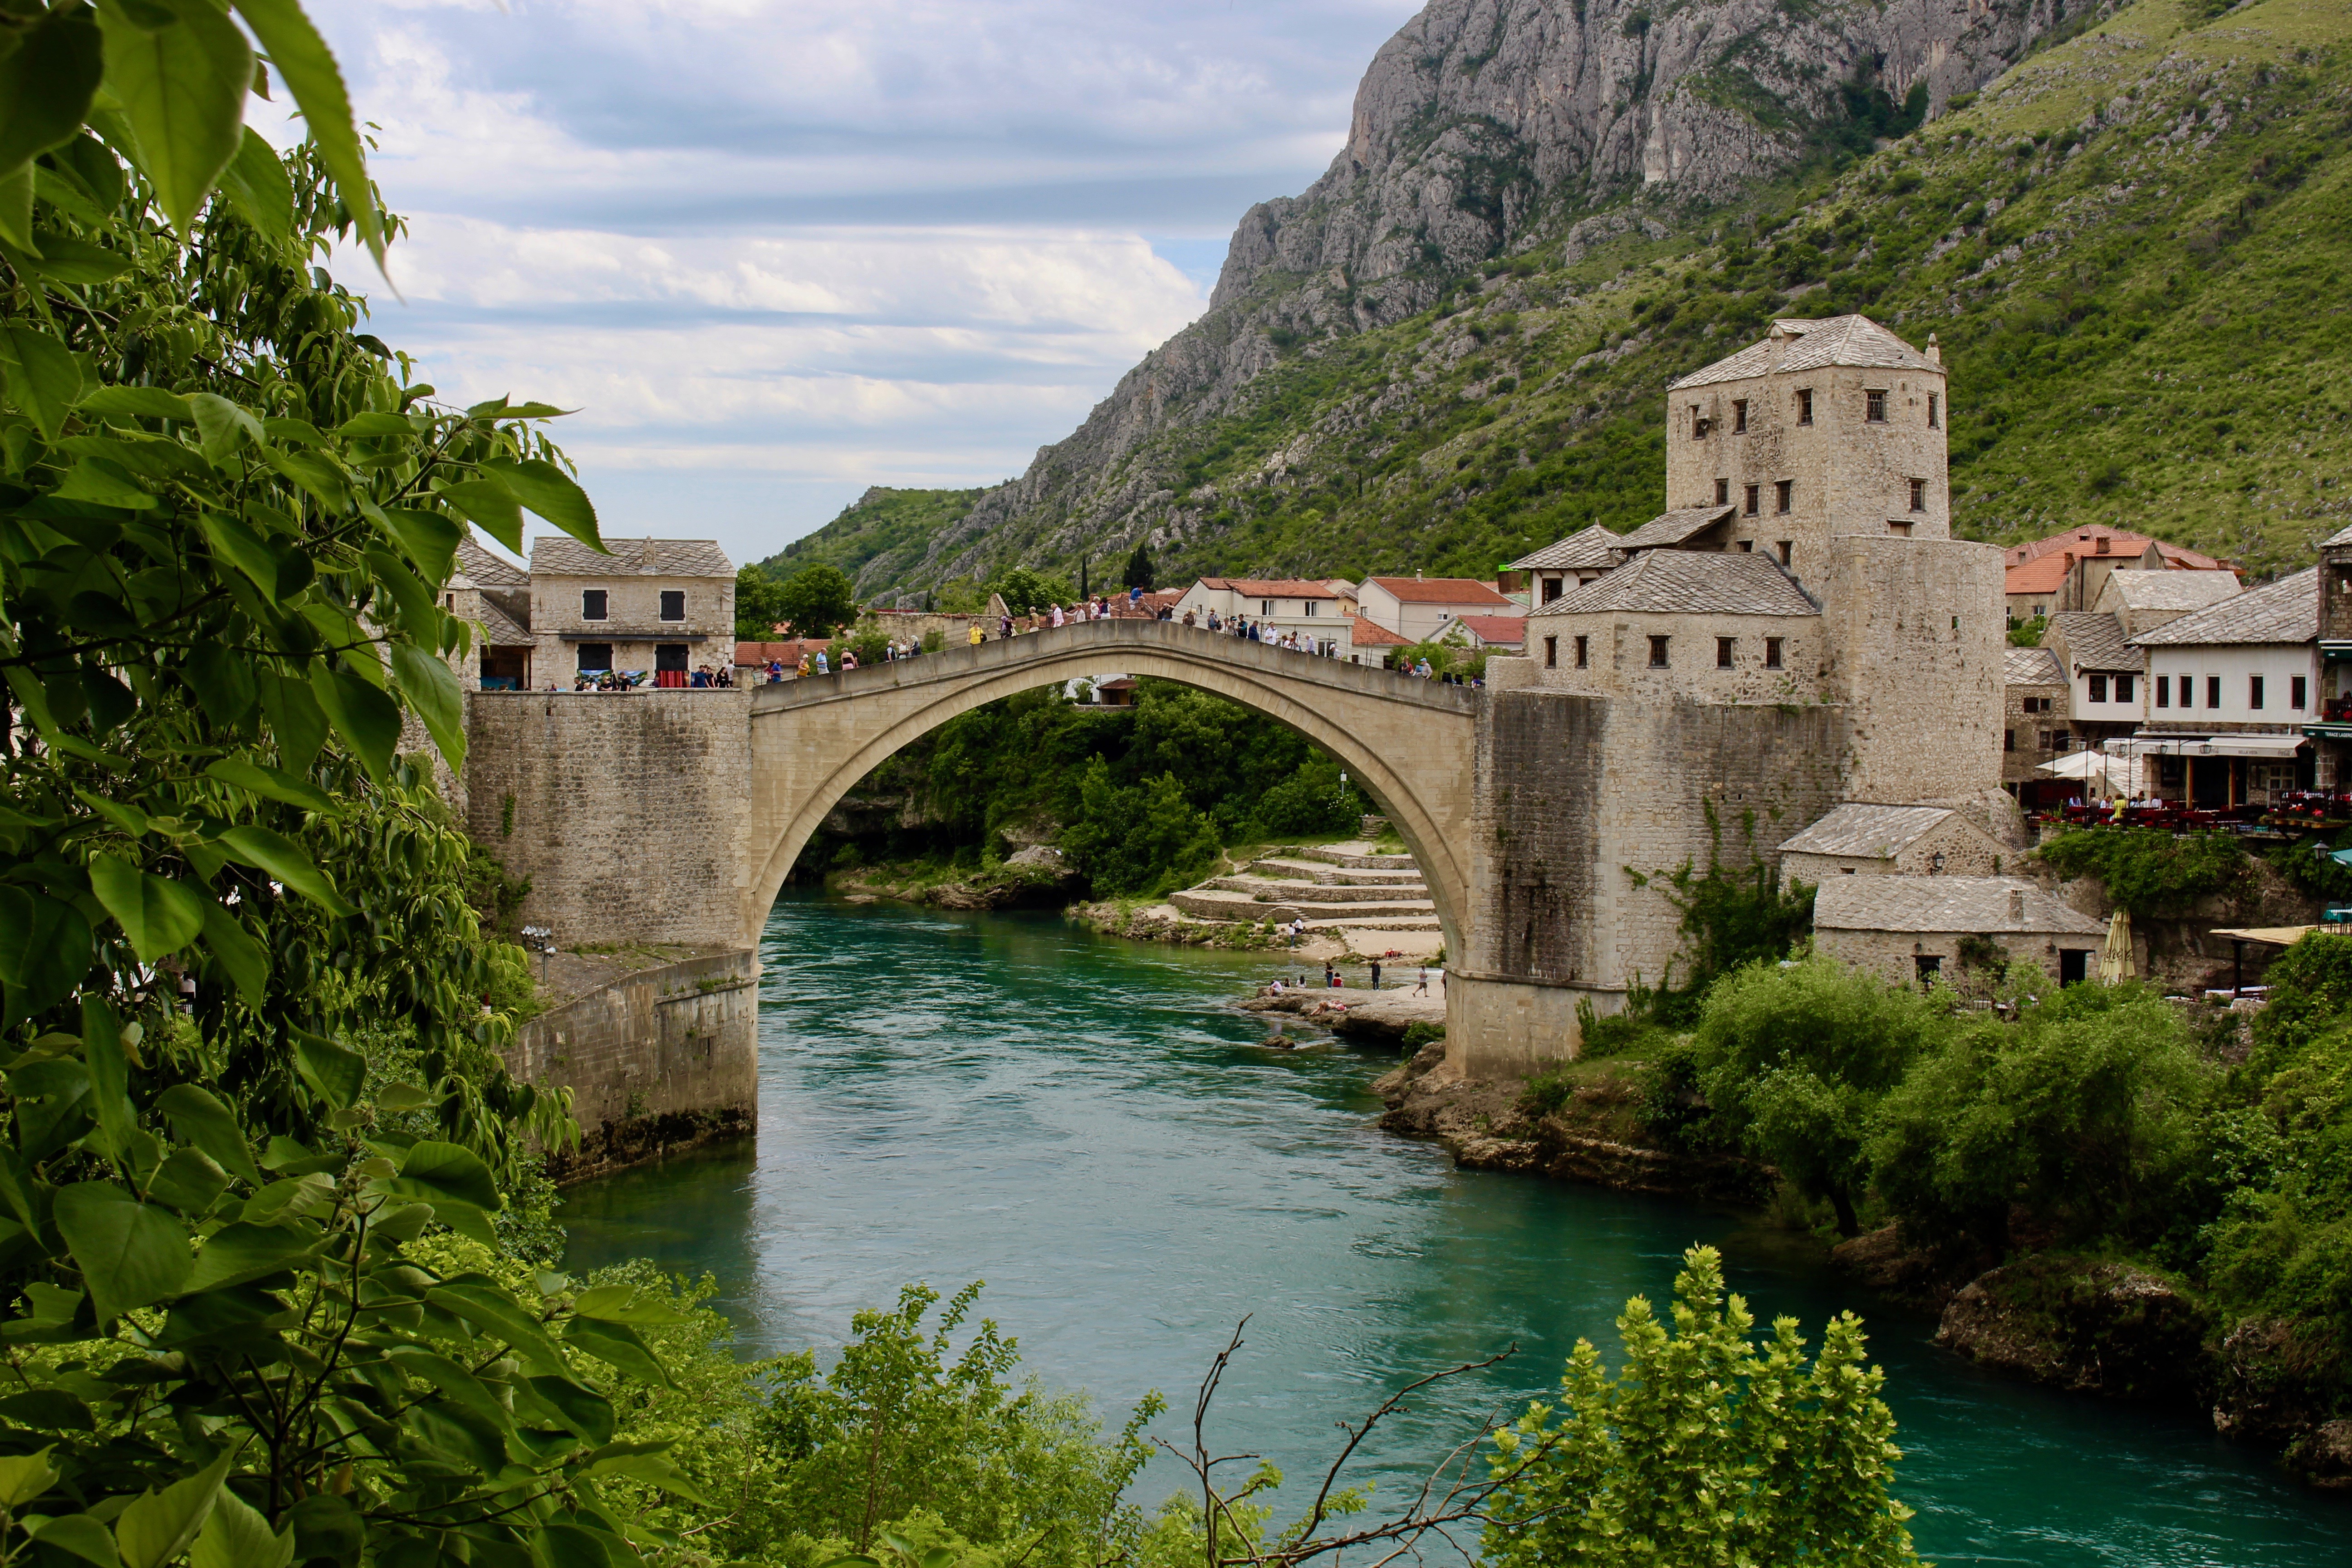 Guest House Lun Is A Wonderful Place To Stay While In Mostar.